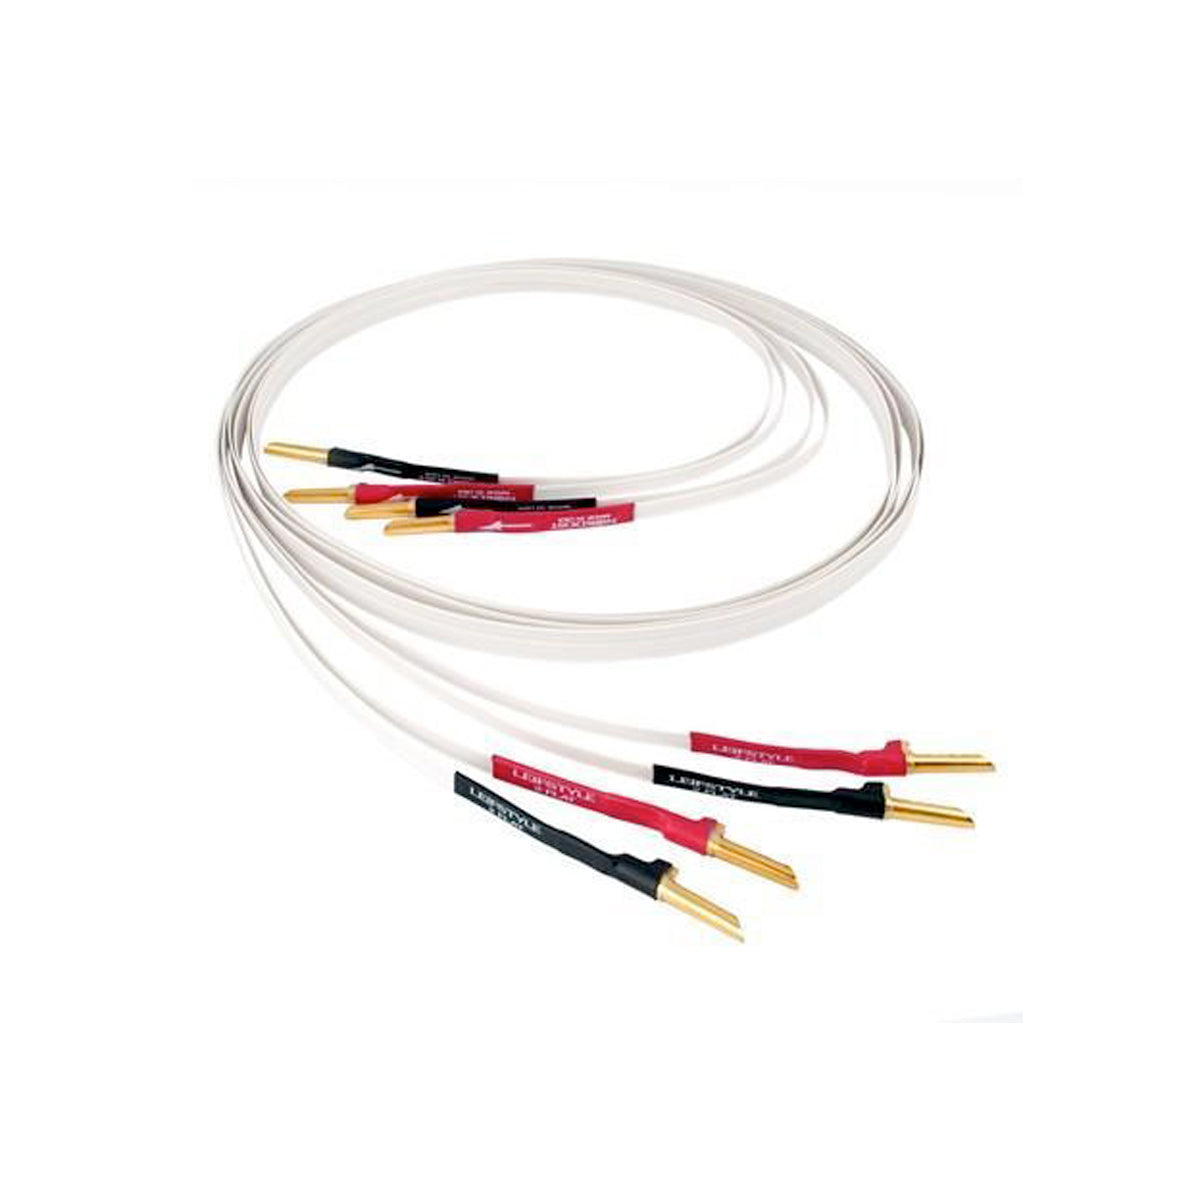 Nordost 2 Flat Speaker Cable - The Audio Experts